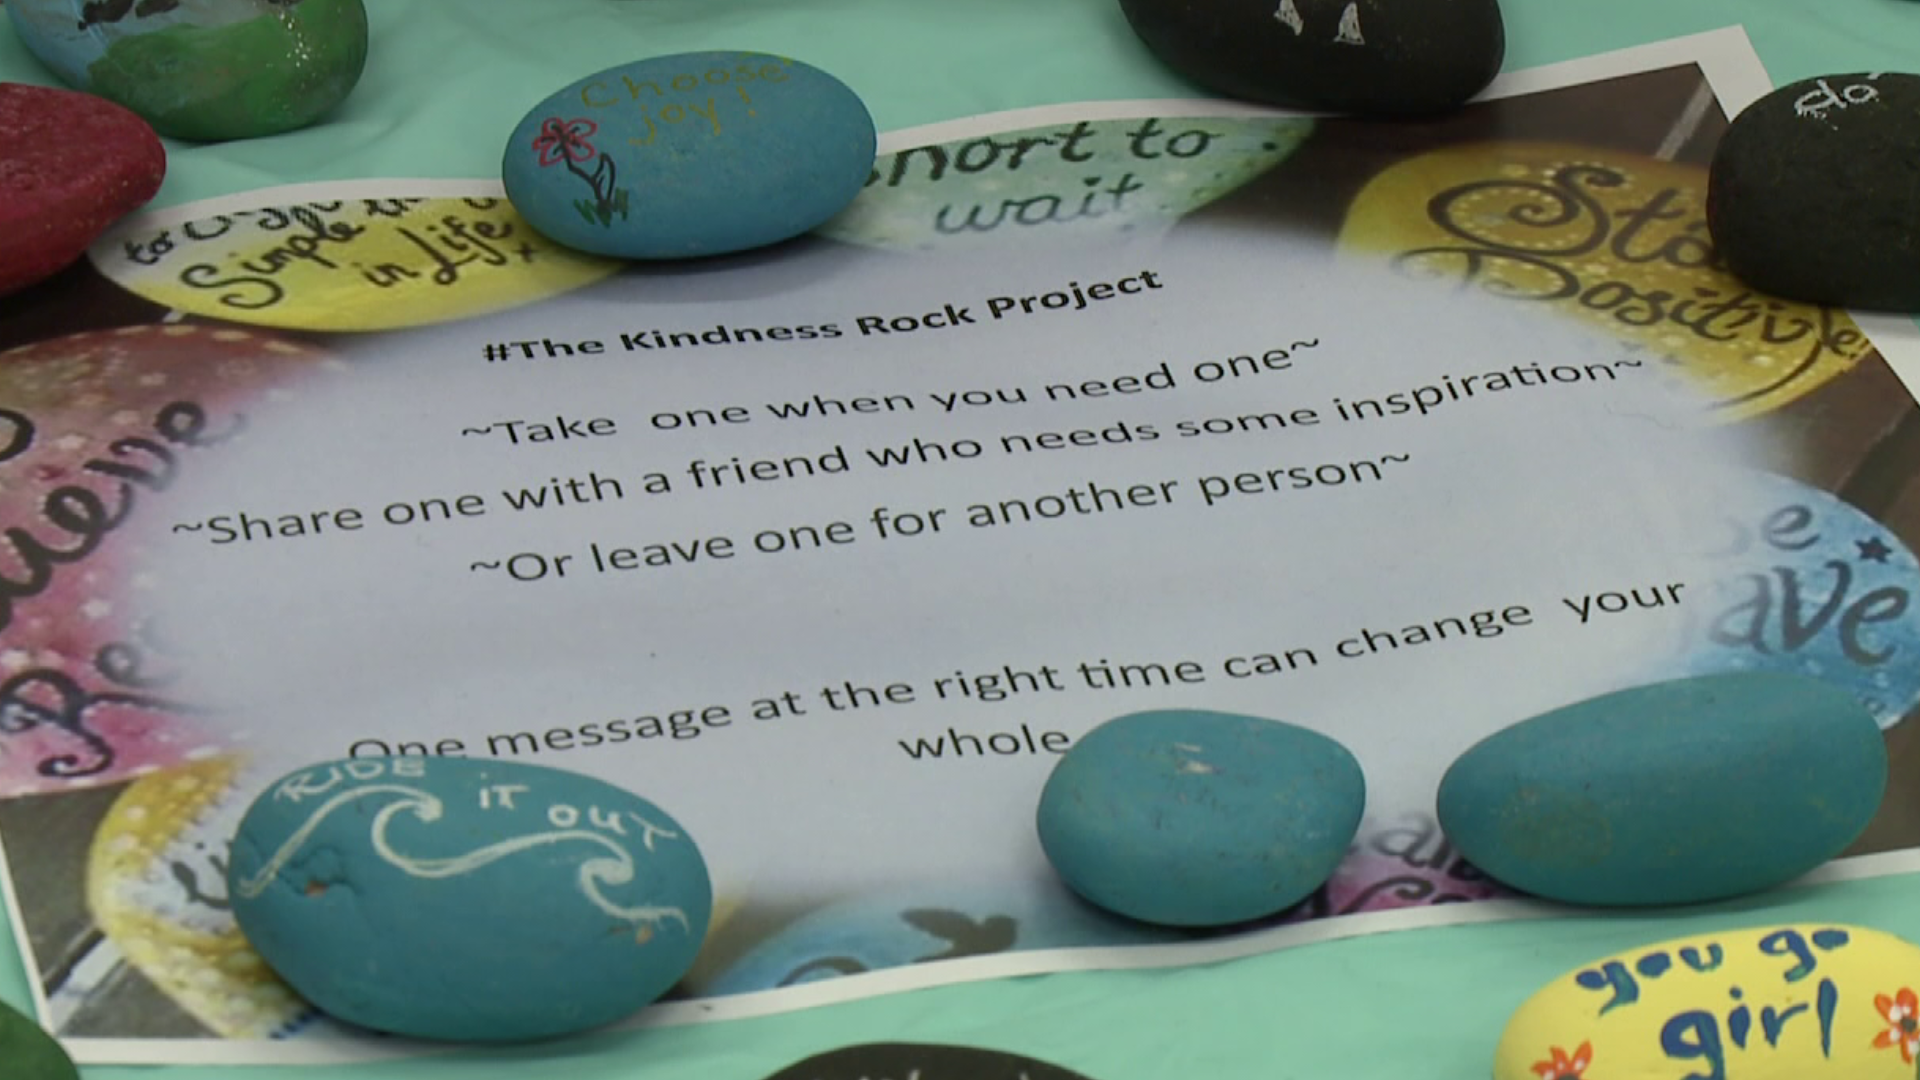 One Library in Luzerne County is hoping to spread a little kindness in its community.